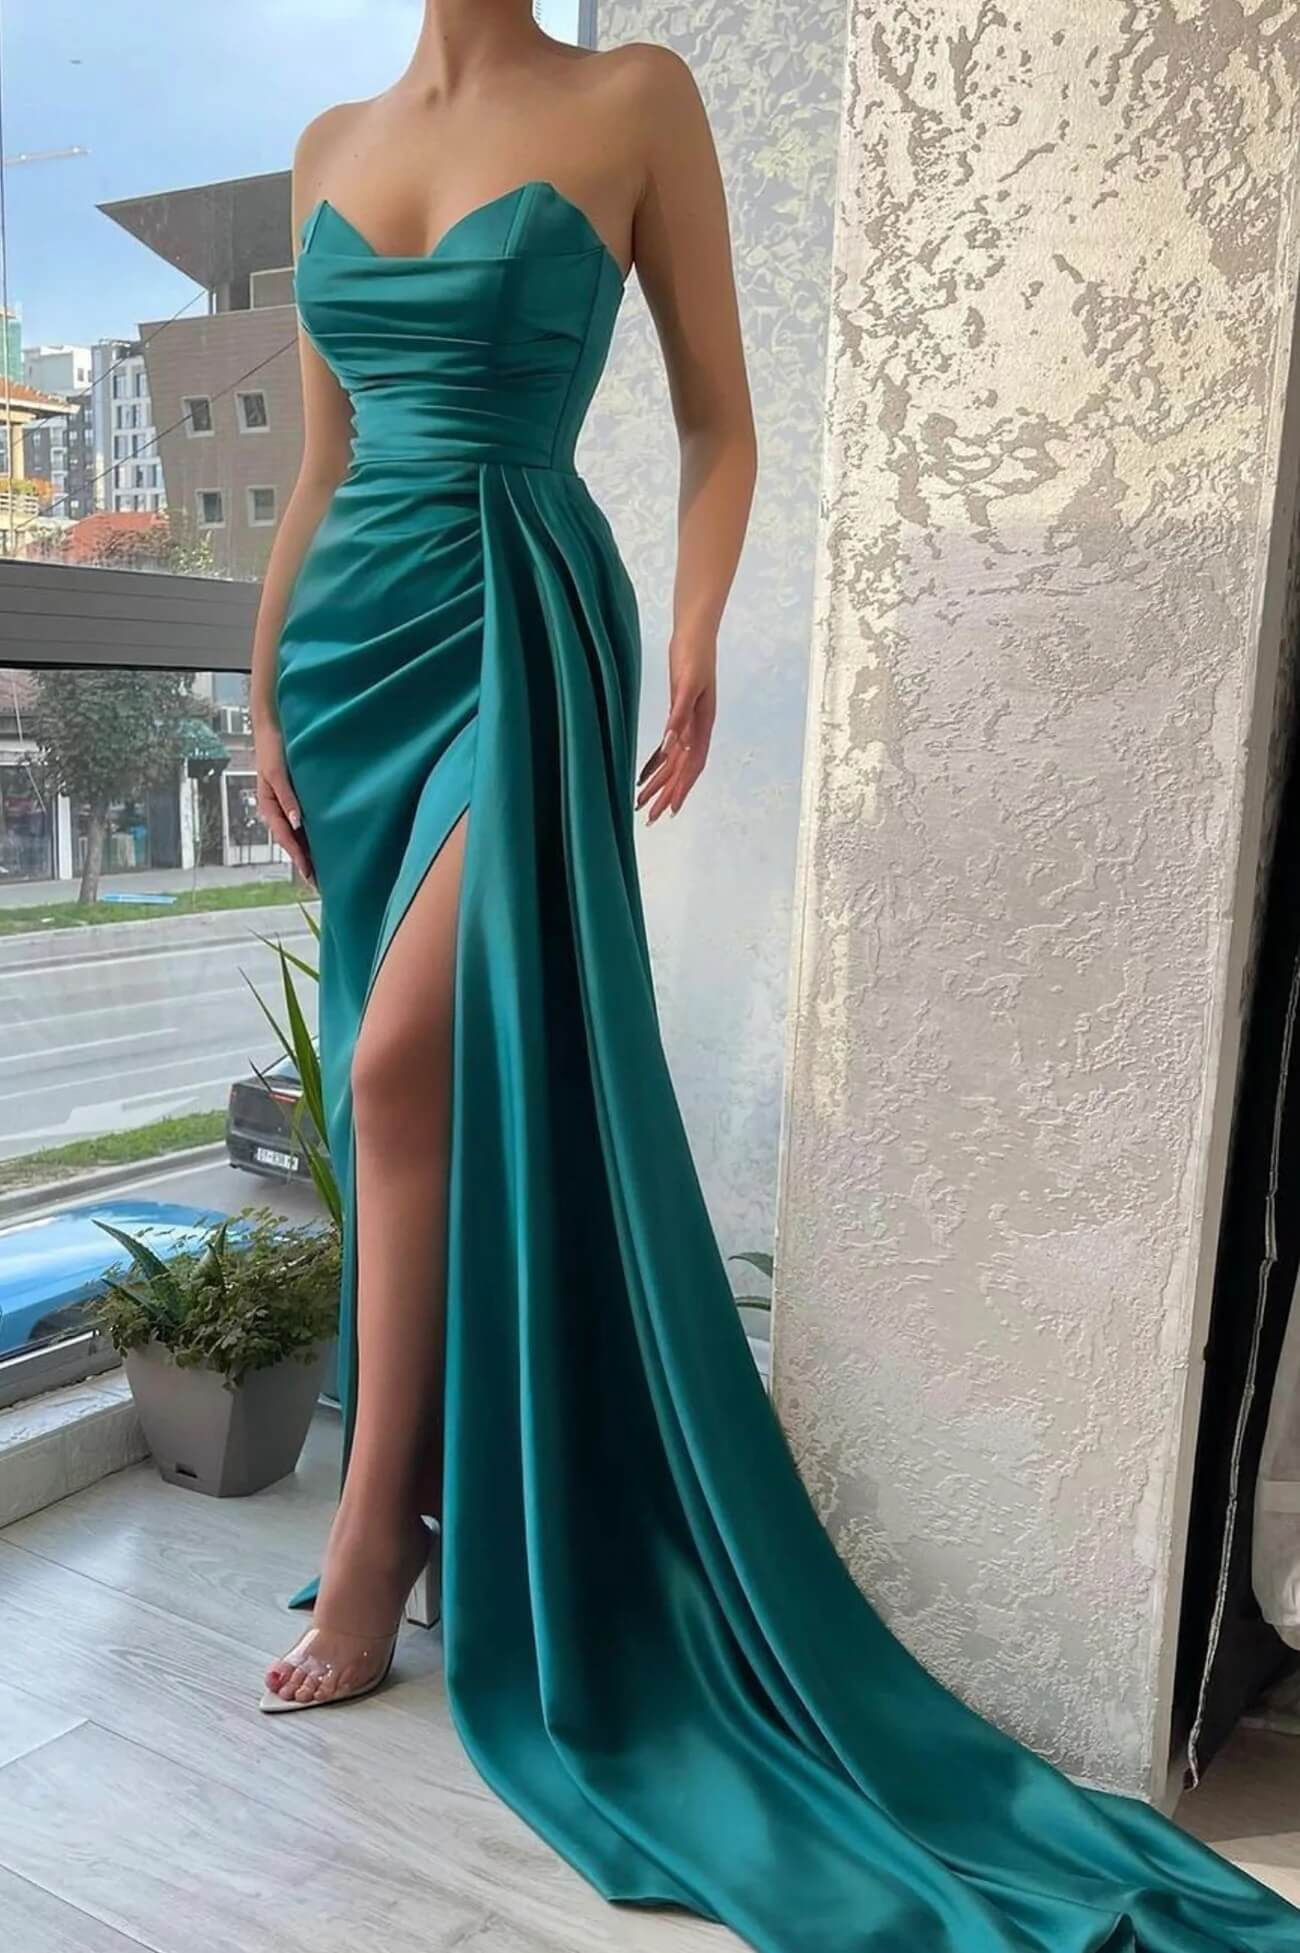 High Side Slit Strapless Evening Dresses, Newest 2023 Long Prom Dresses, Sexy Party Dresses with Streamer